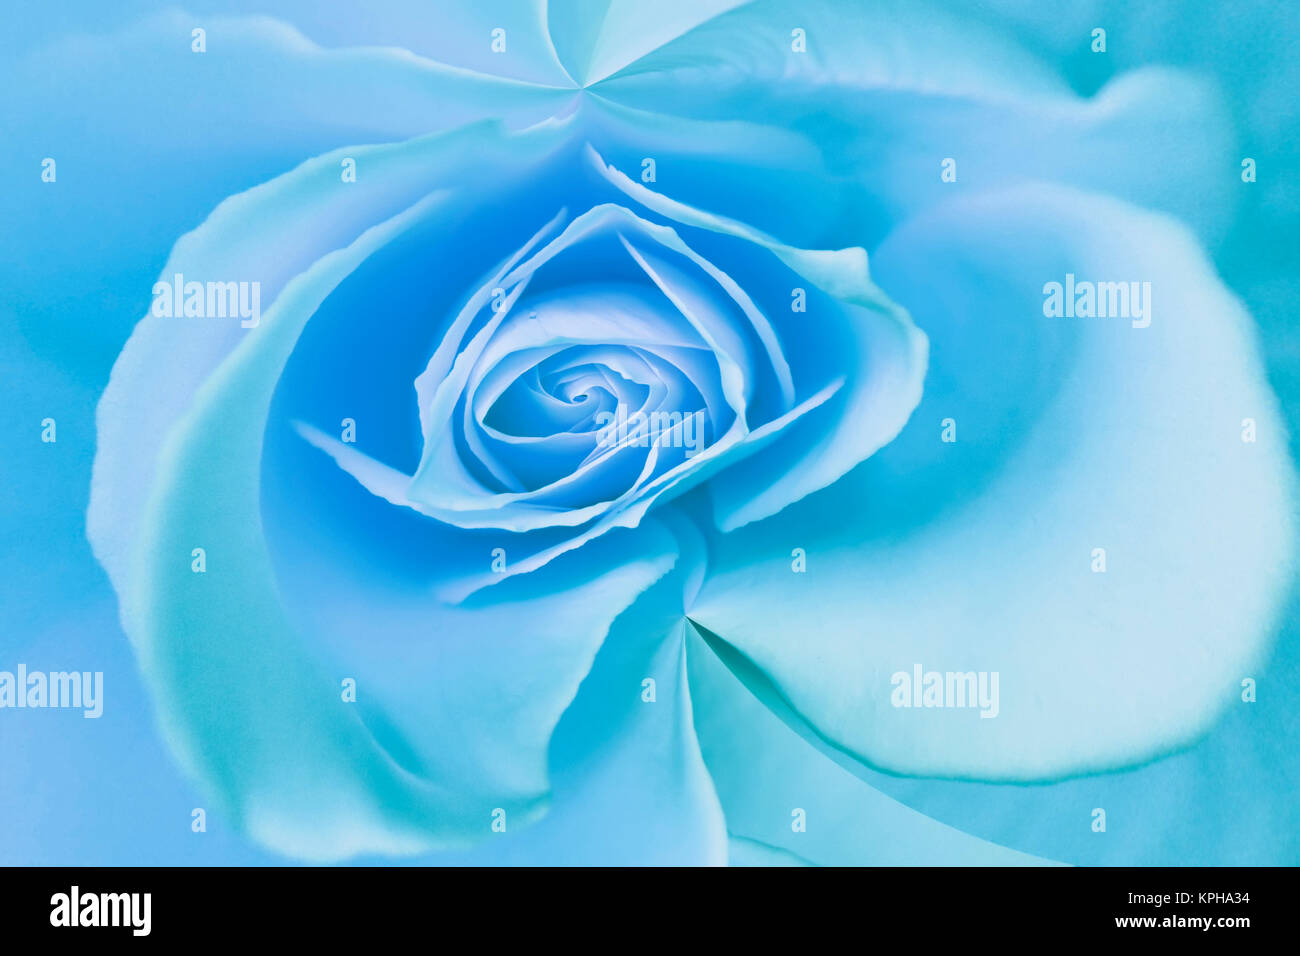 Close-up of a blue rose. Stock Photo